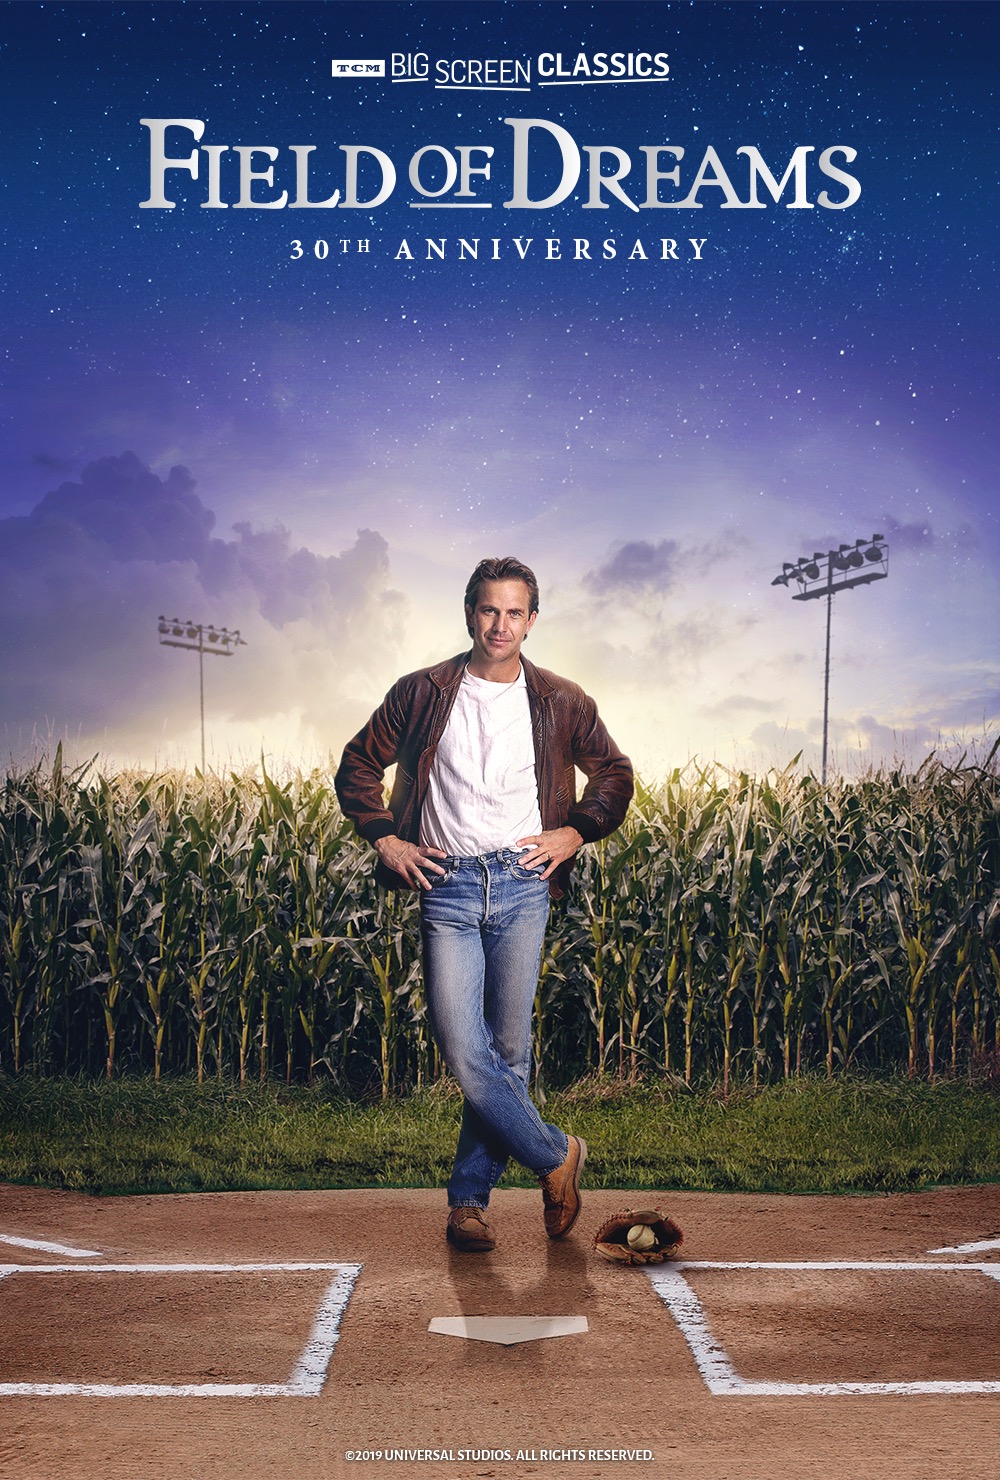 Field of Dreams-30th Anniversary-Chicago White Sox Yearbook